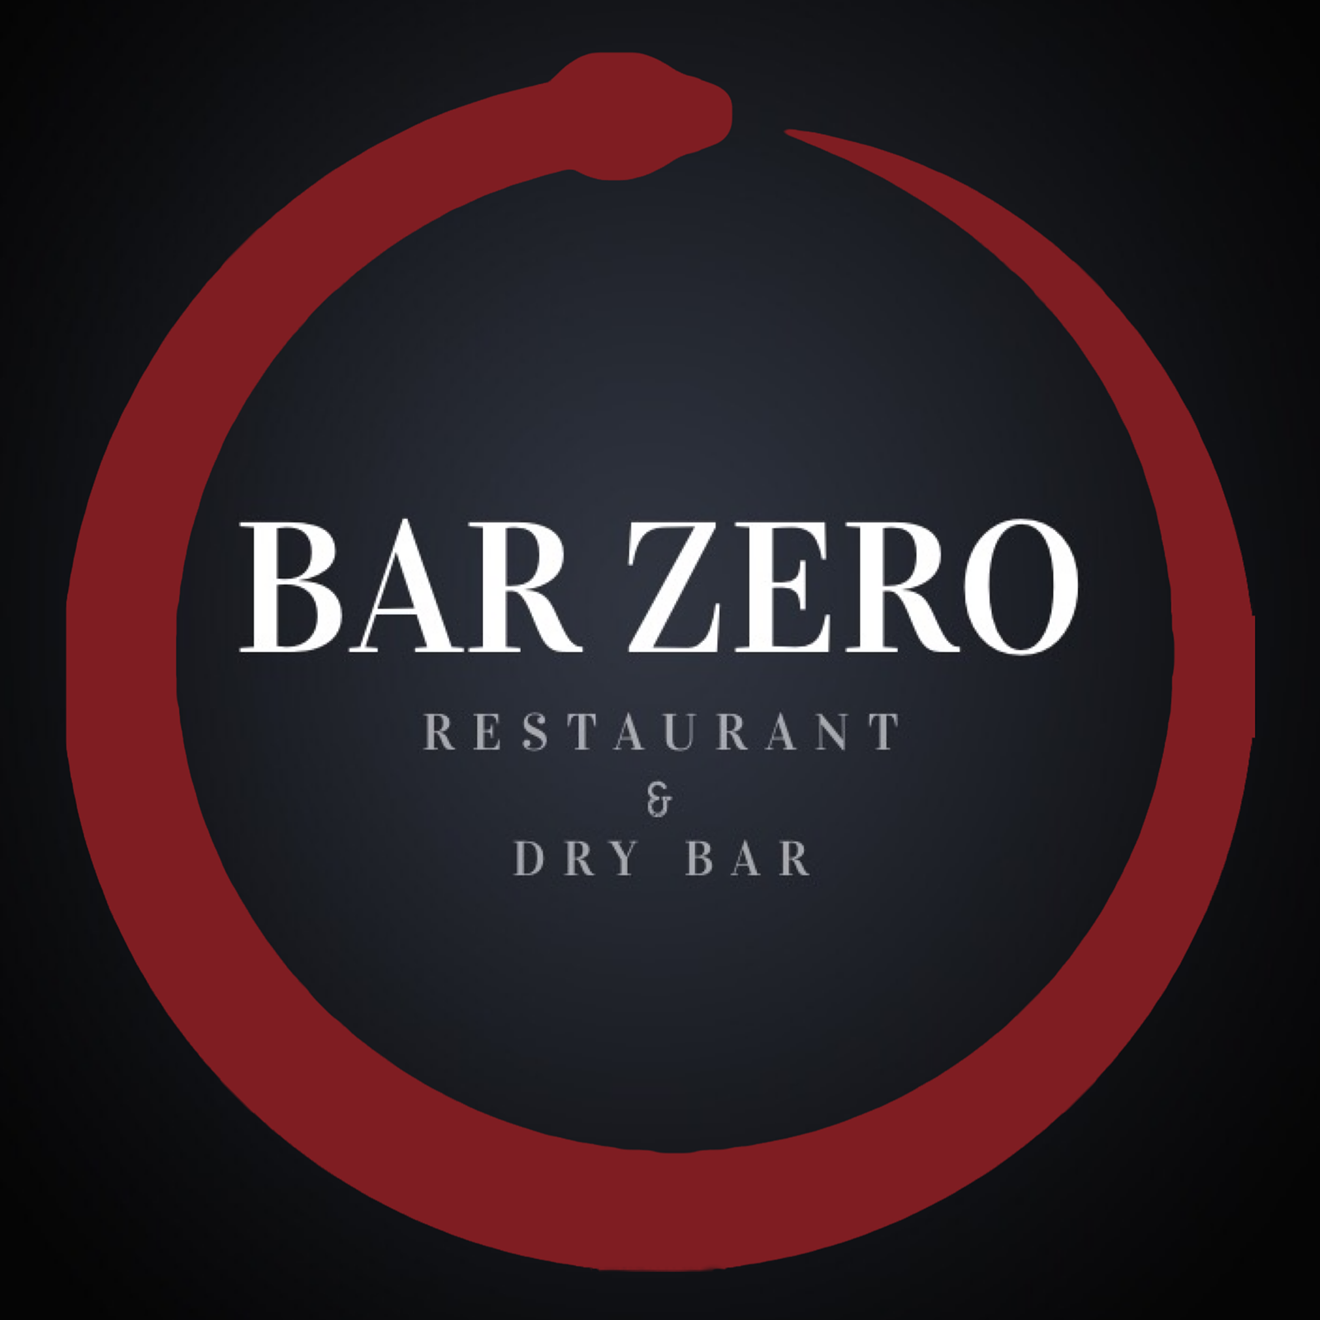 The snake in Bar Zero's logo is an ouroborous, which symbolizes rebirth.